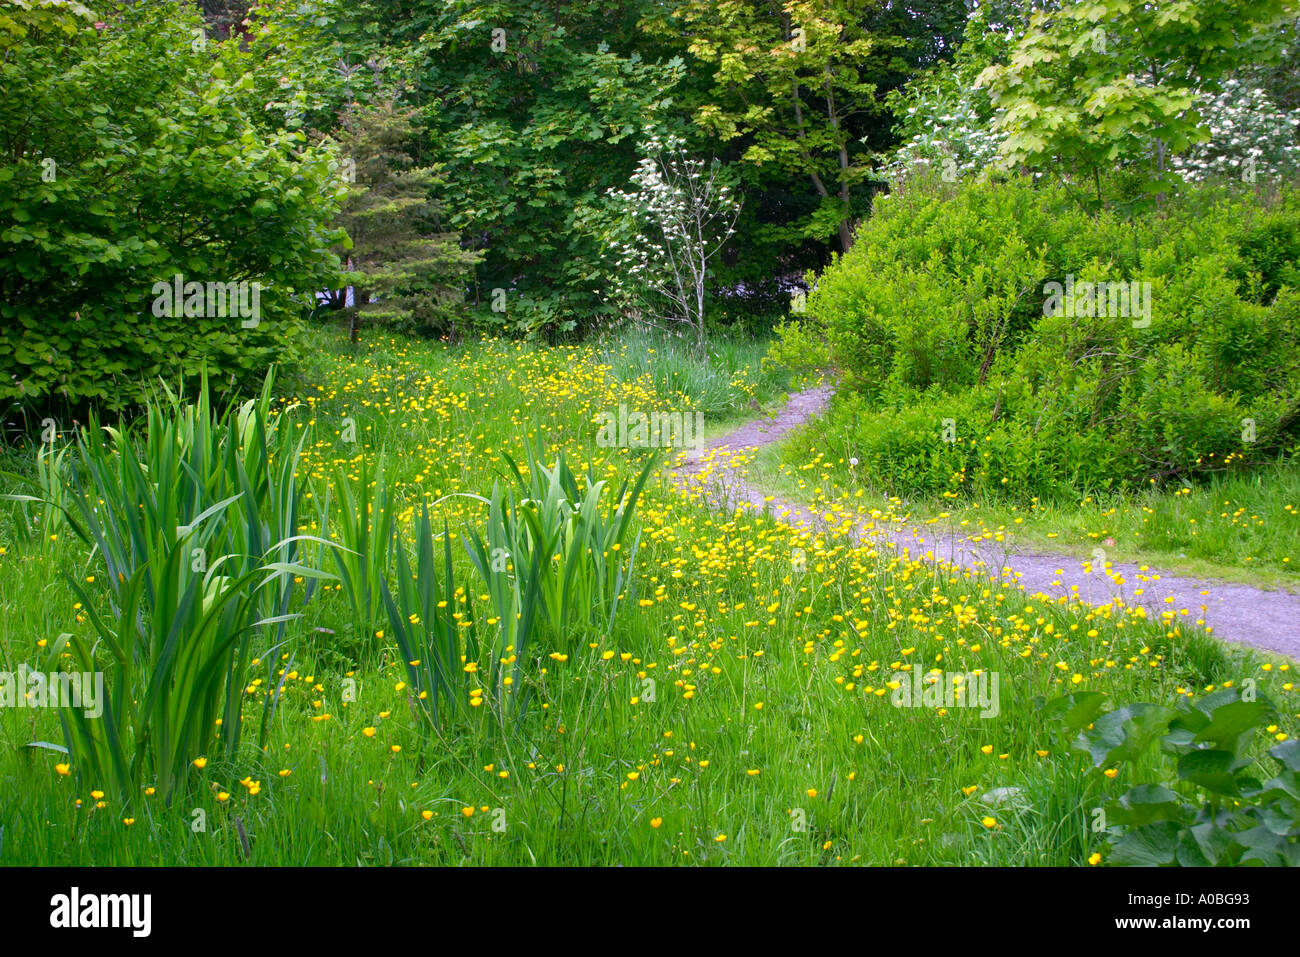 Wildflowers growing in marshy area at edge of wood Stock Photo